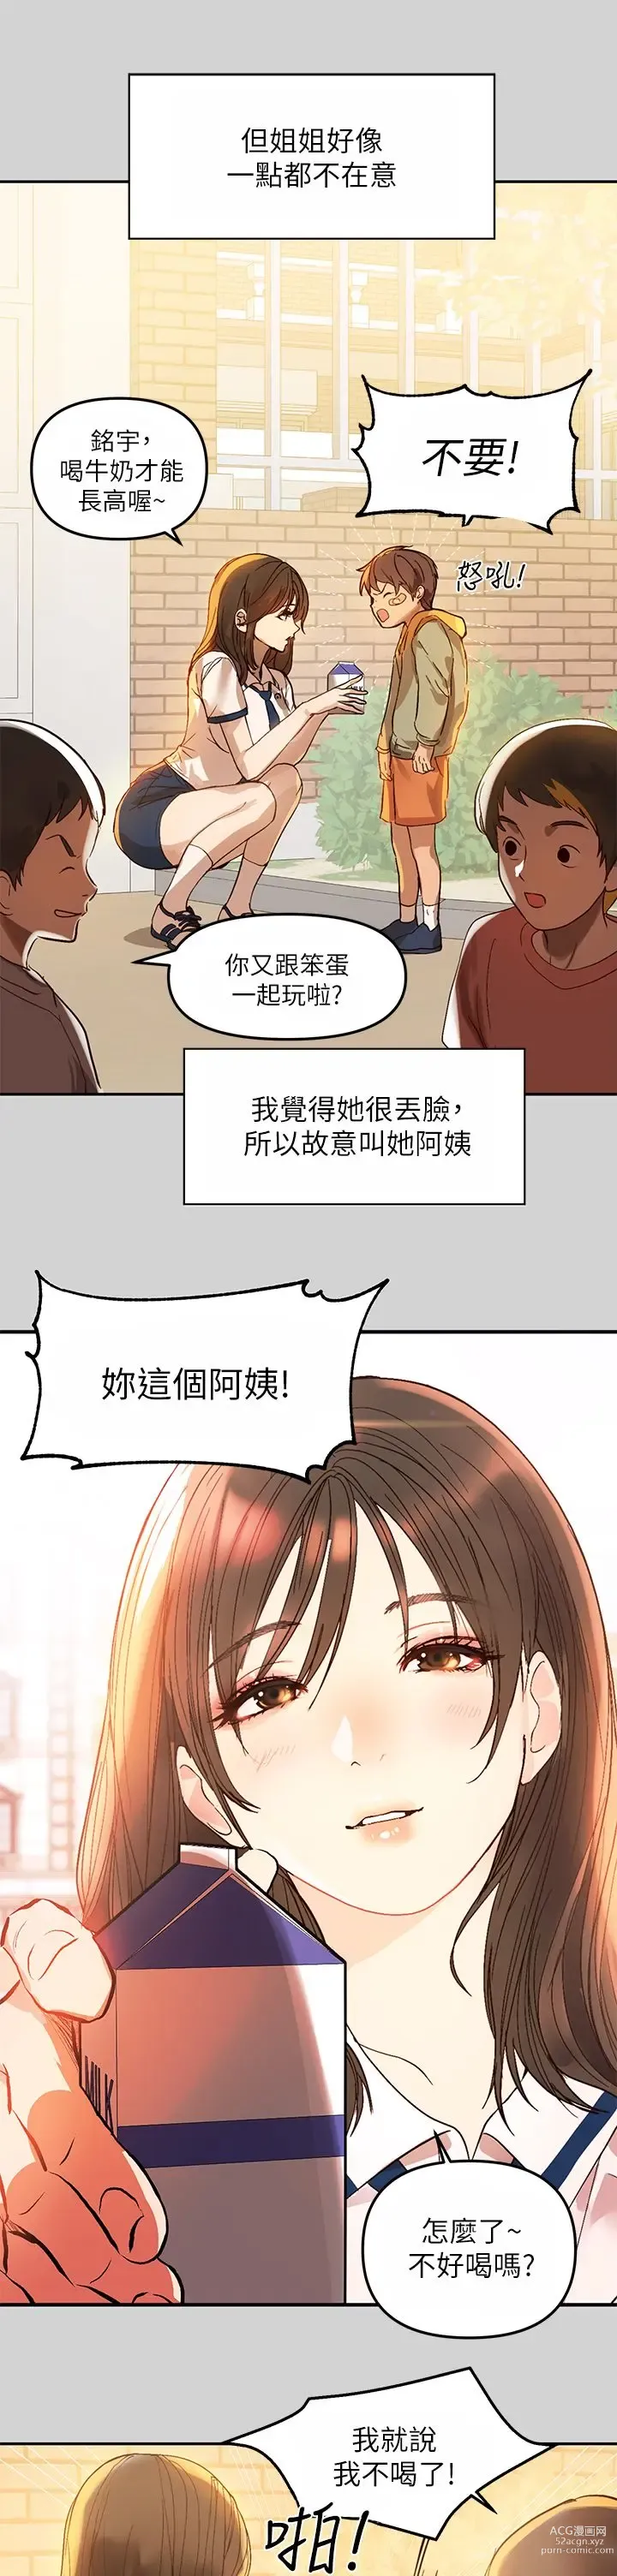 Page 6 of manga 富家女姐姐/ The Owner Of A Building 1-50